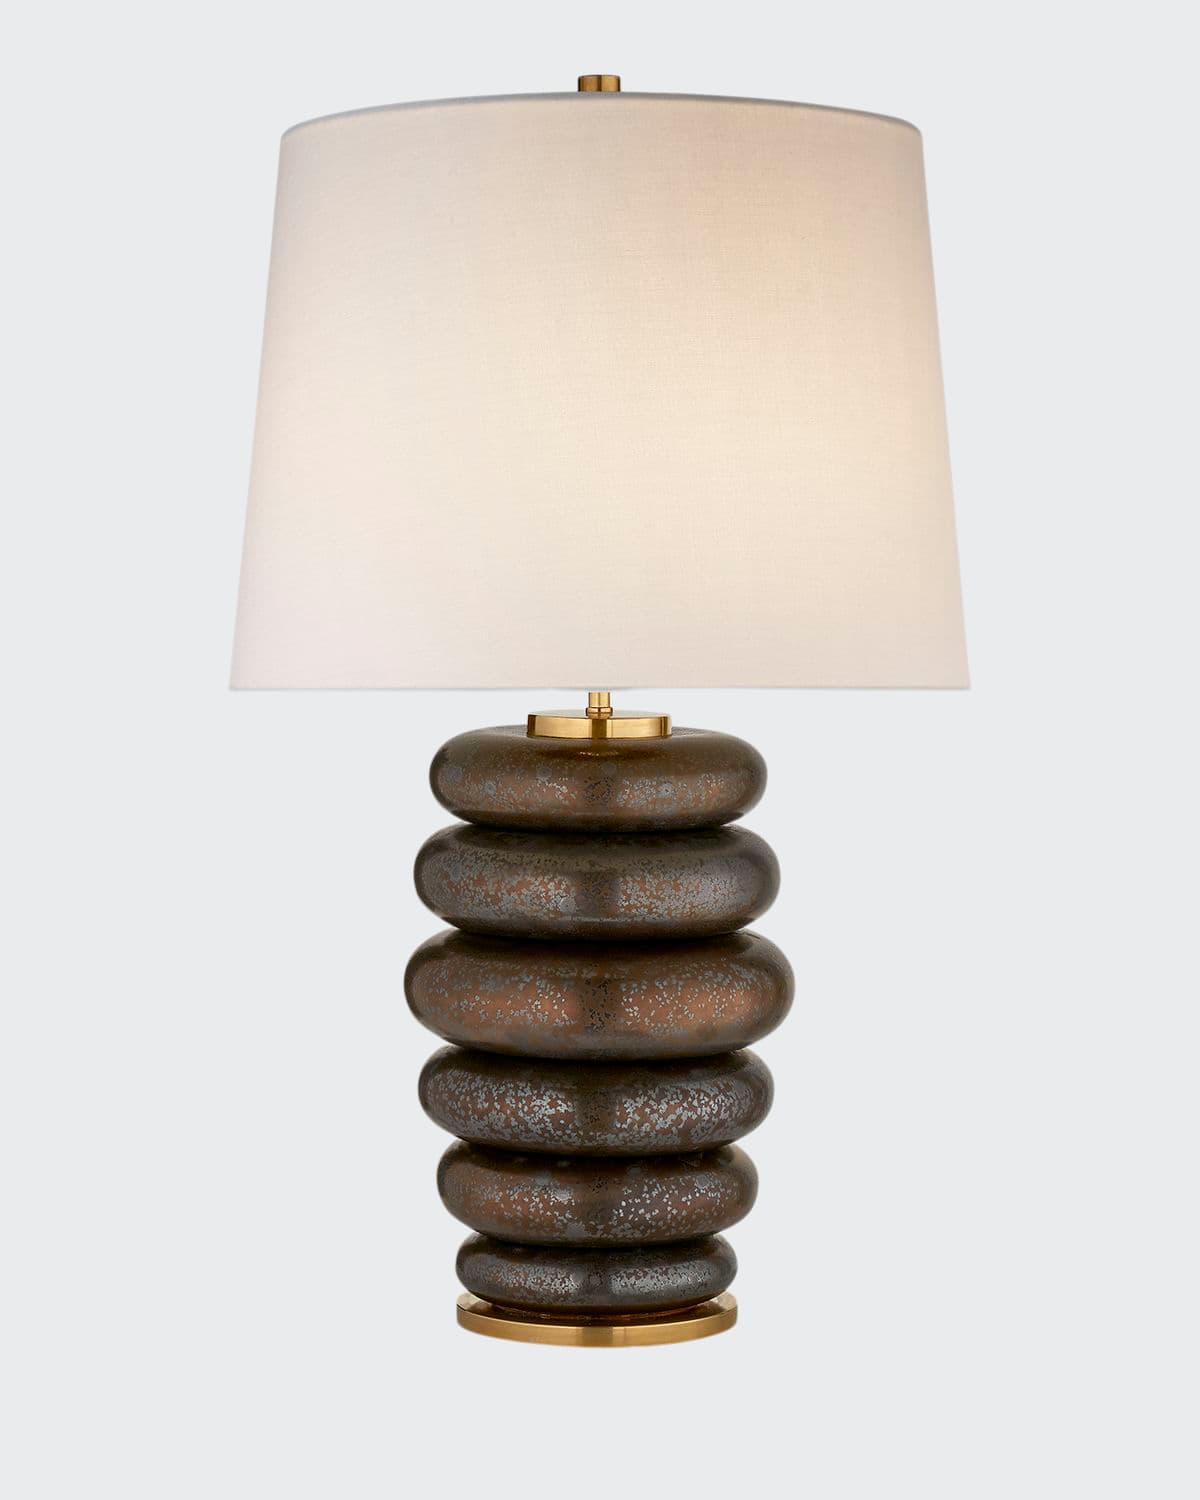 Kelly Wearstler For Visual Comfort Signature Phoebe Stacked Table Lamp In Crystal Bronze